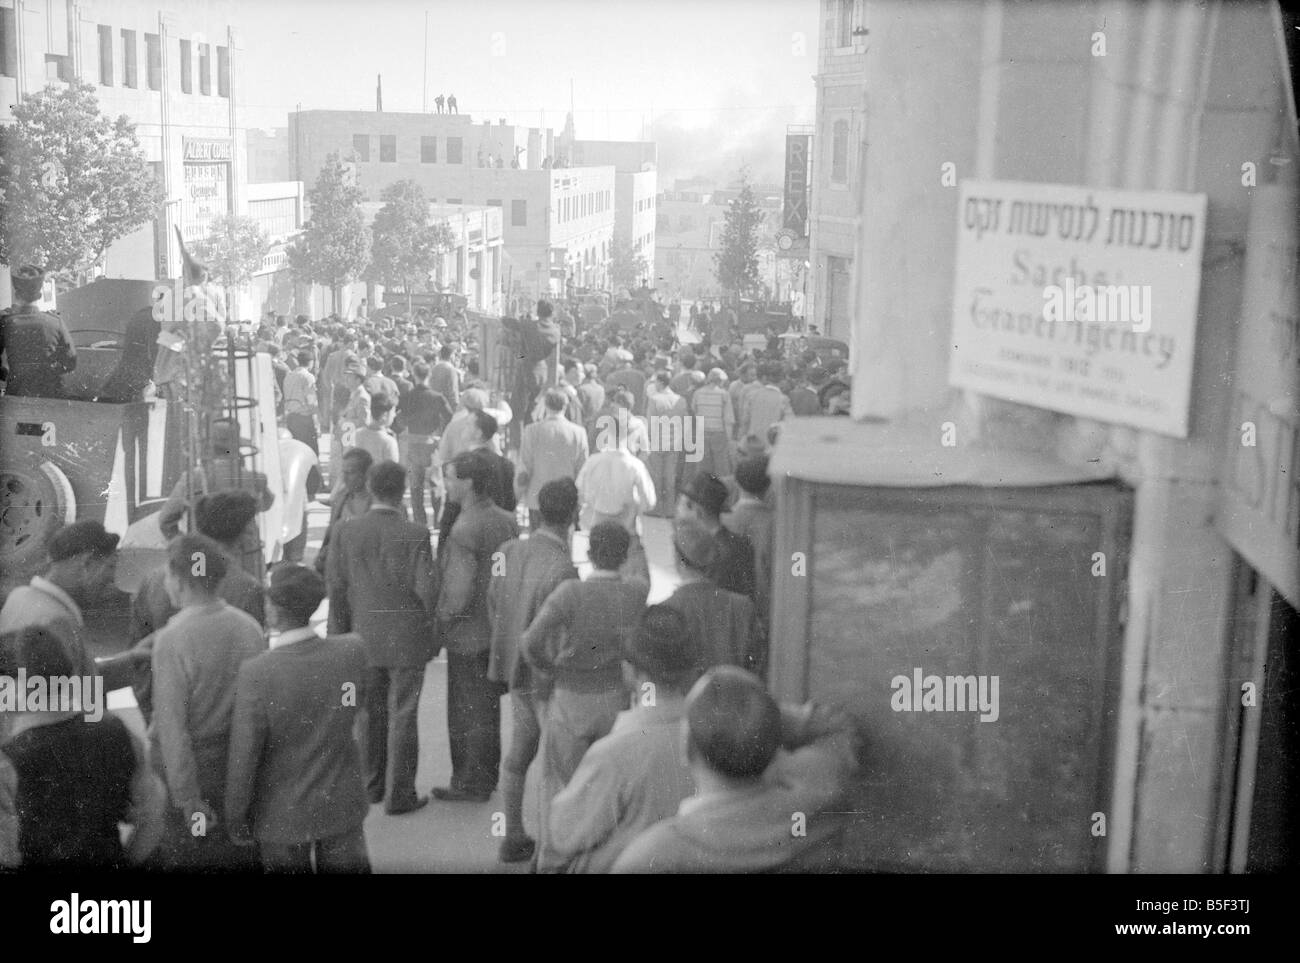 On February 22, 1948, as the conflict over the coming partition of Palestine grew, three car bombs arranged by Arab irregulars exploded on Ben Yehuda Street killing 52 Jewish civilians and leaving 123 injured. Two British deserters were involved in the attack, having been promised pay by Abed al-Kader al-Husseini, who was the commander of the Holy War Army forces in the area. British involvement was claimed because the alleged armored trucks with police insignia had escorted the truck bombs into the area. Our Picture Shows: Crowds mill about close to the scene of the first explosion Stock Photo